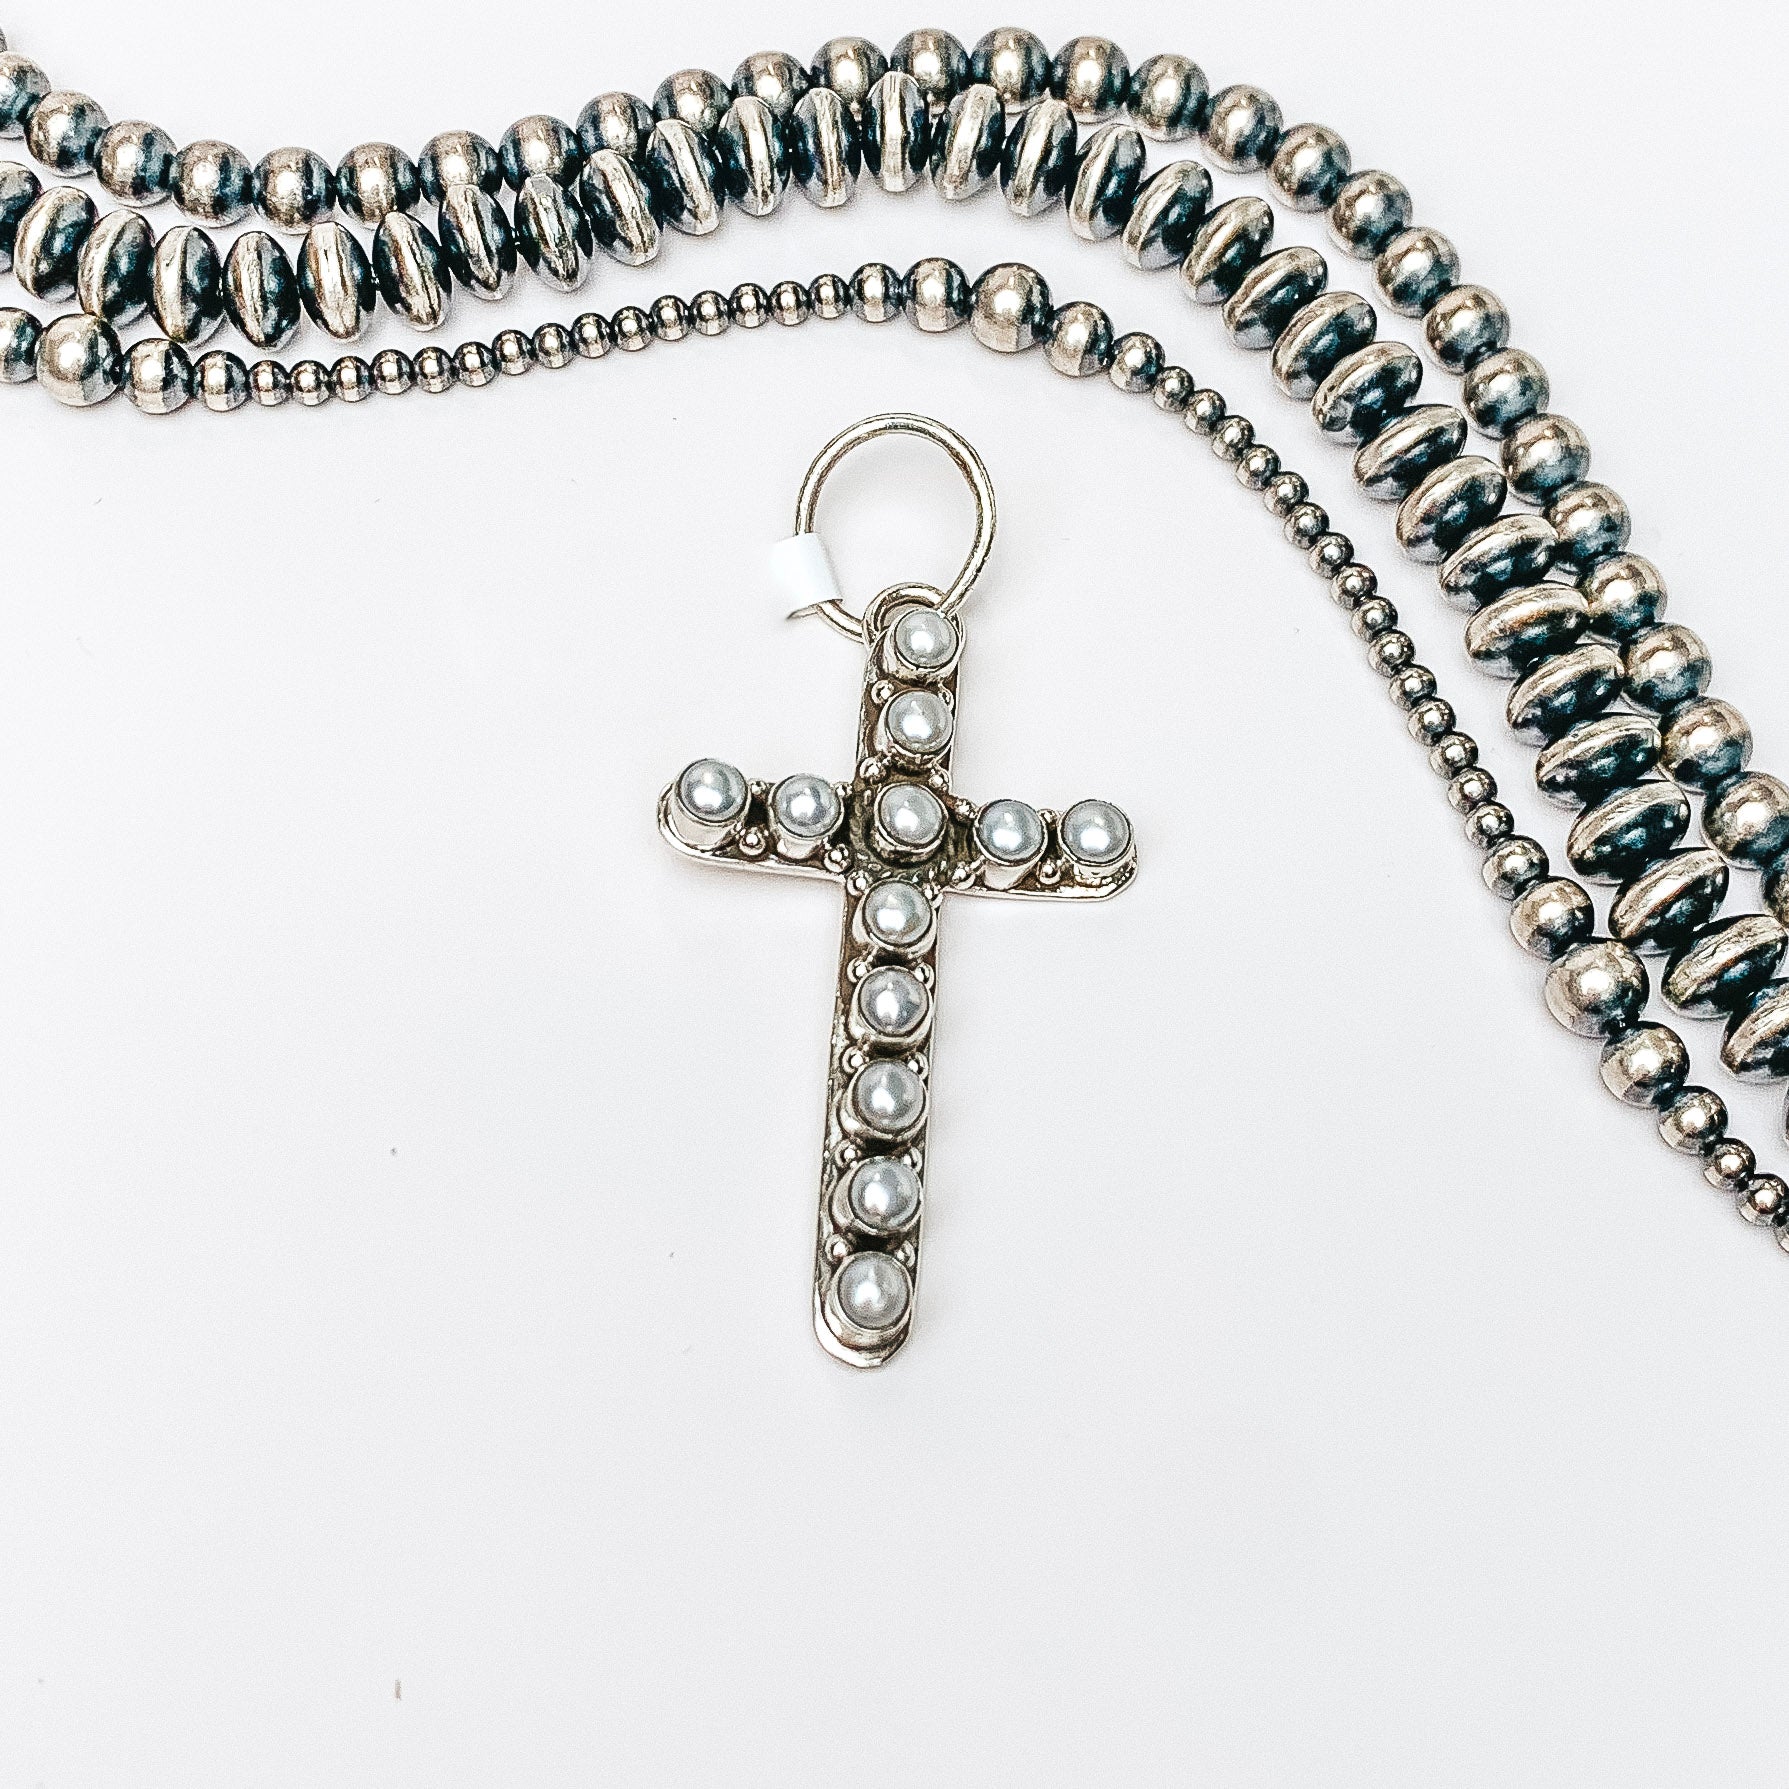 Centered in the picture is a small cross pendant with mother of pearl stones. Above the cross is navajo pearls, all on a white background. 